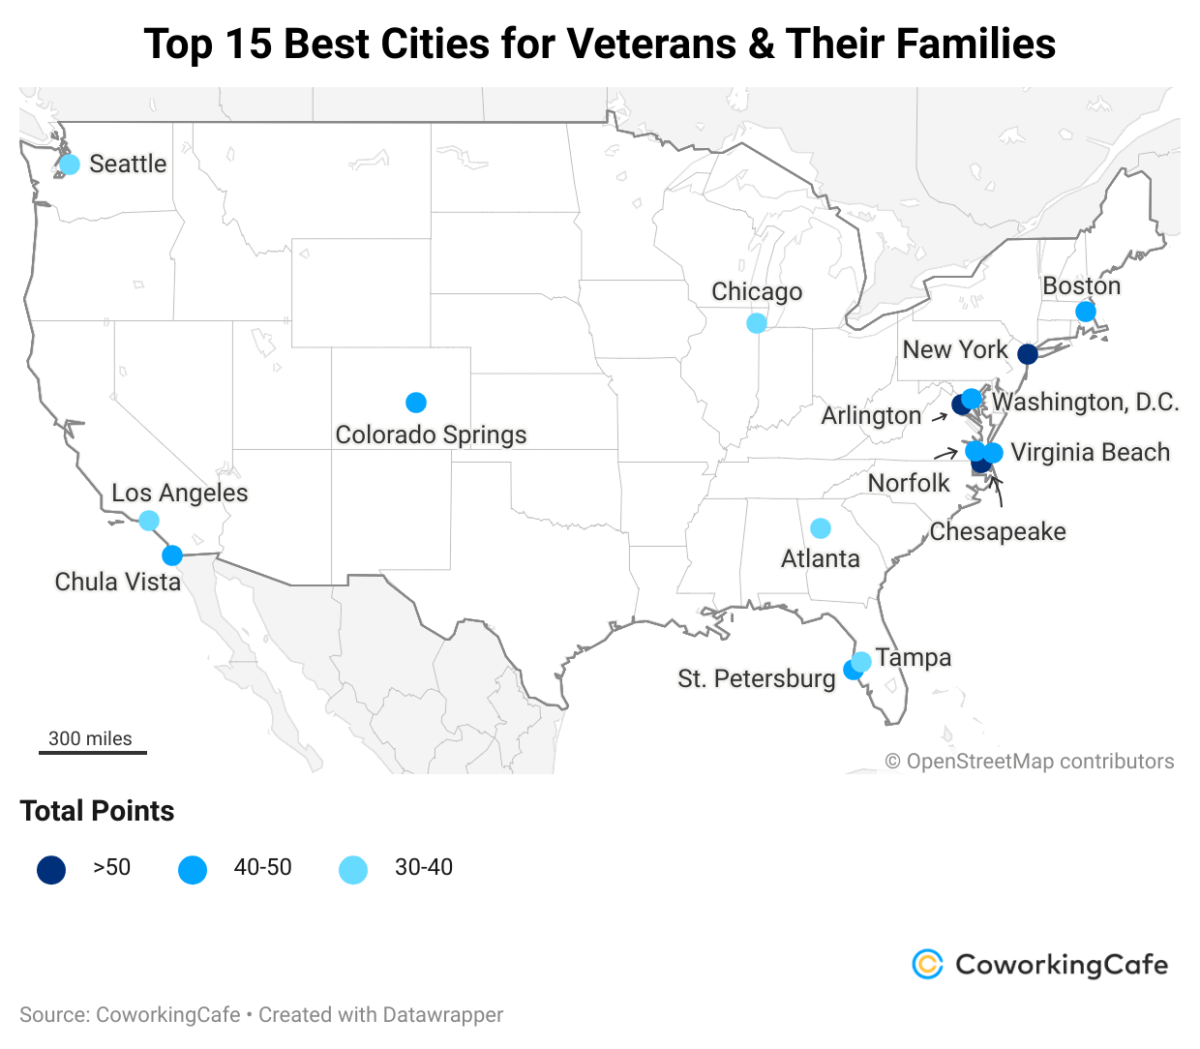 America’s 15 Best Cities for Veterans and Their Families